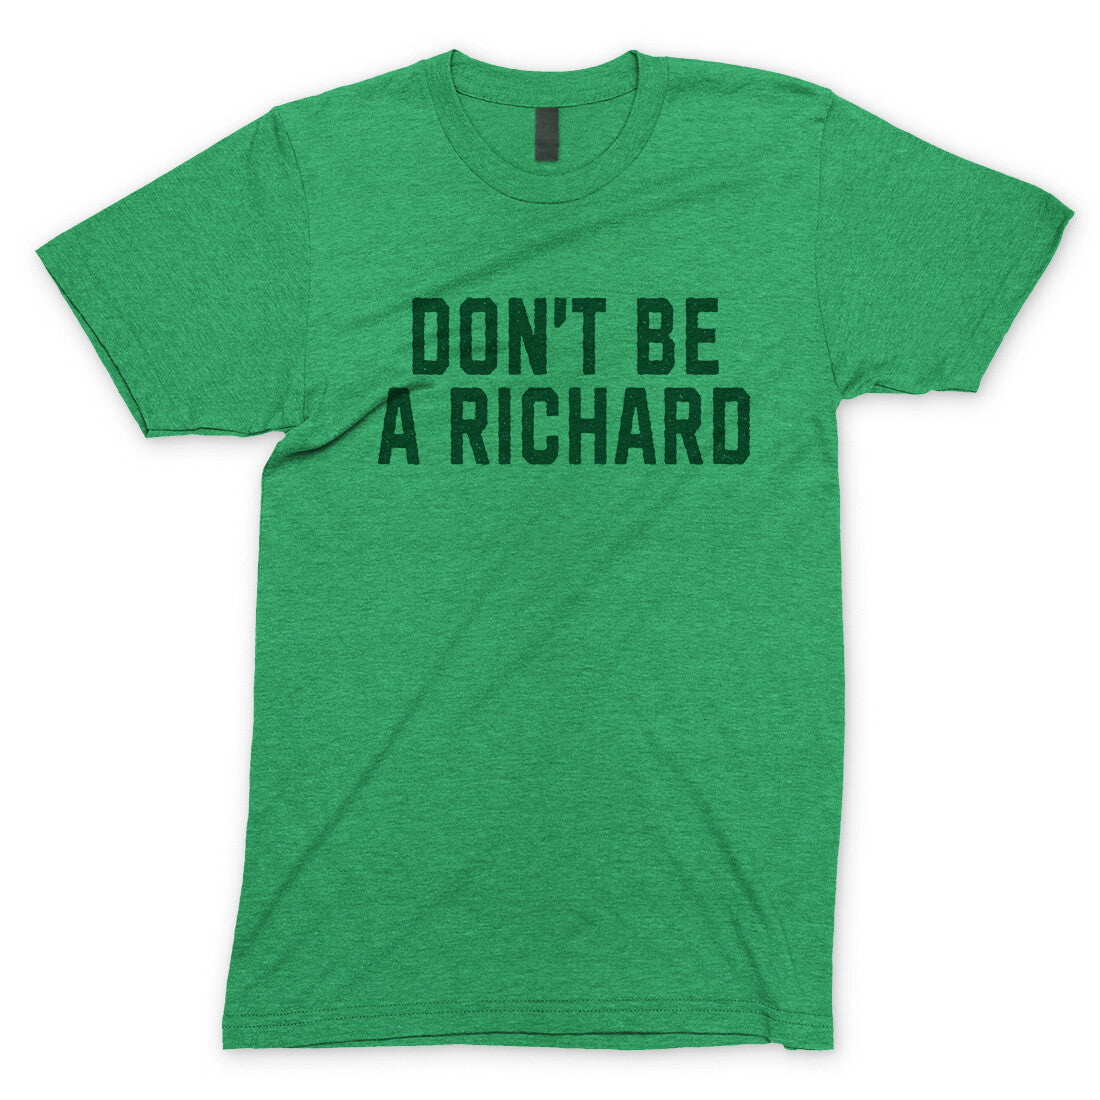 Don't Be a Richard in Heather Irish Green Color